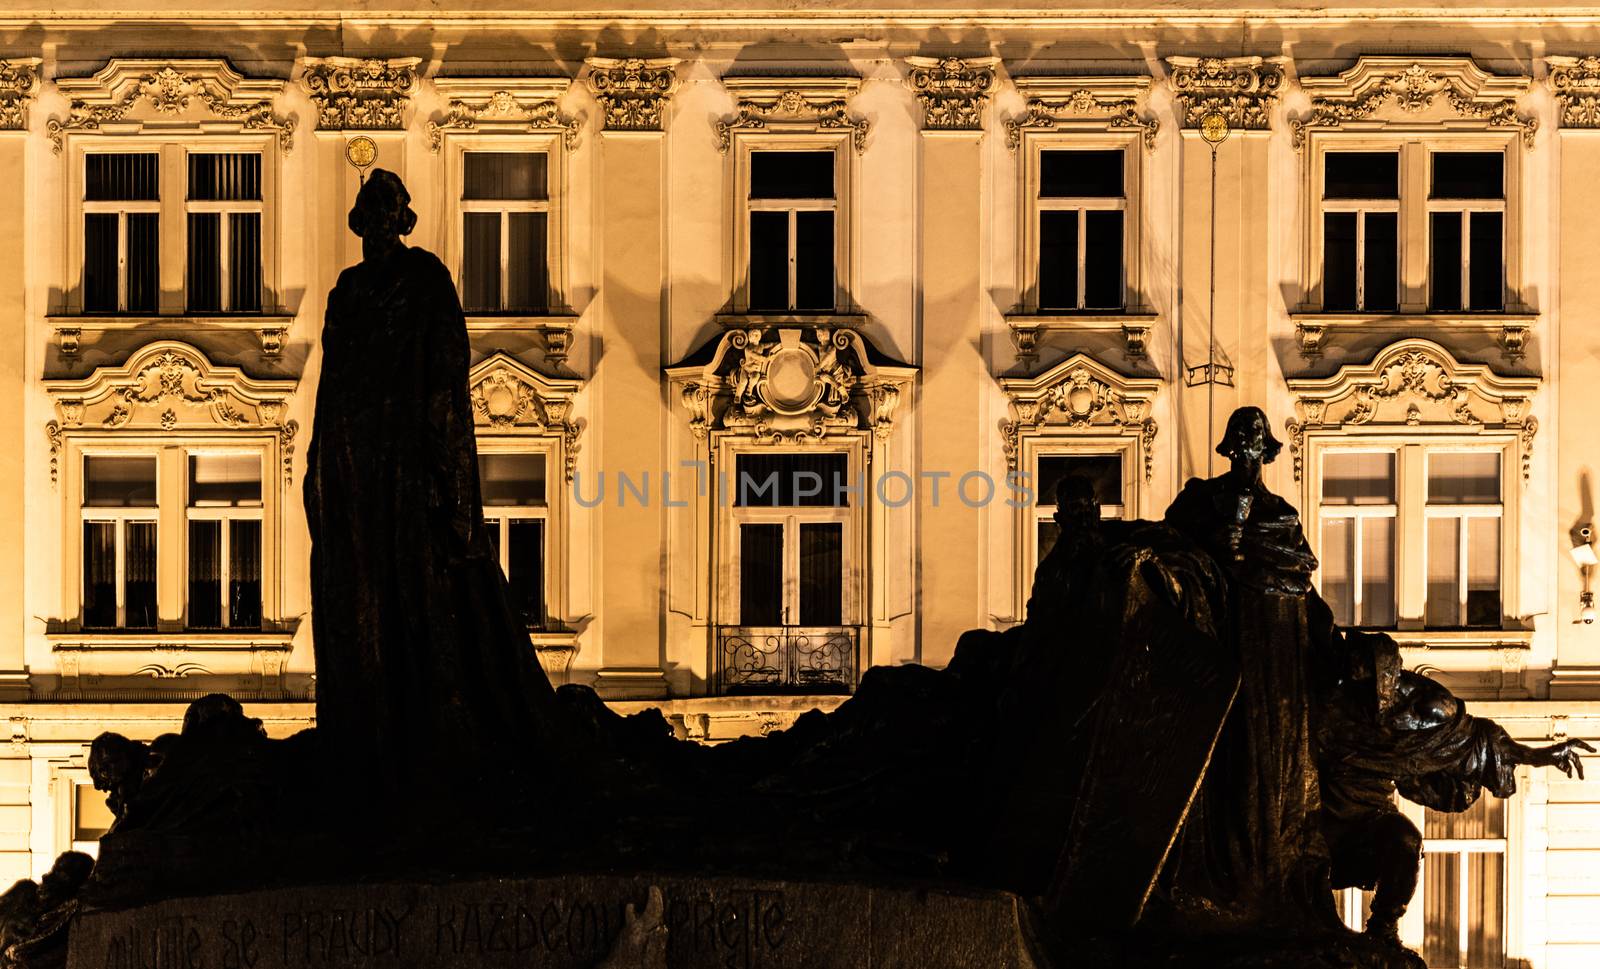 Silhouette of Jan Hus Memorial at Old Town Square by night. Prague, Czech Republic.